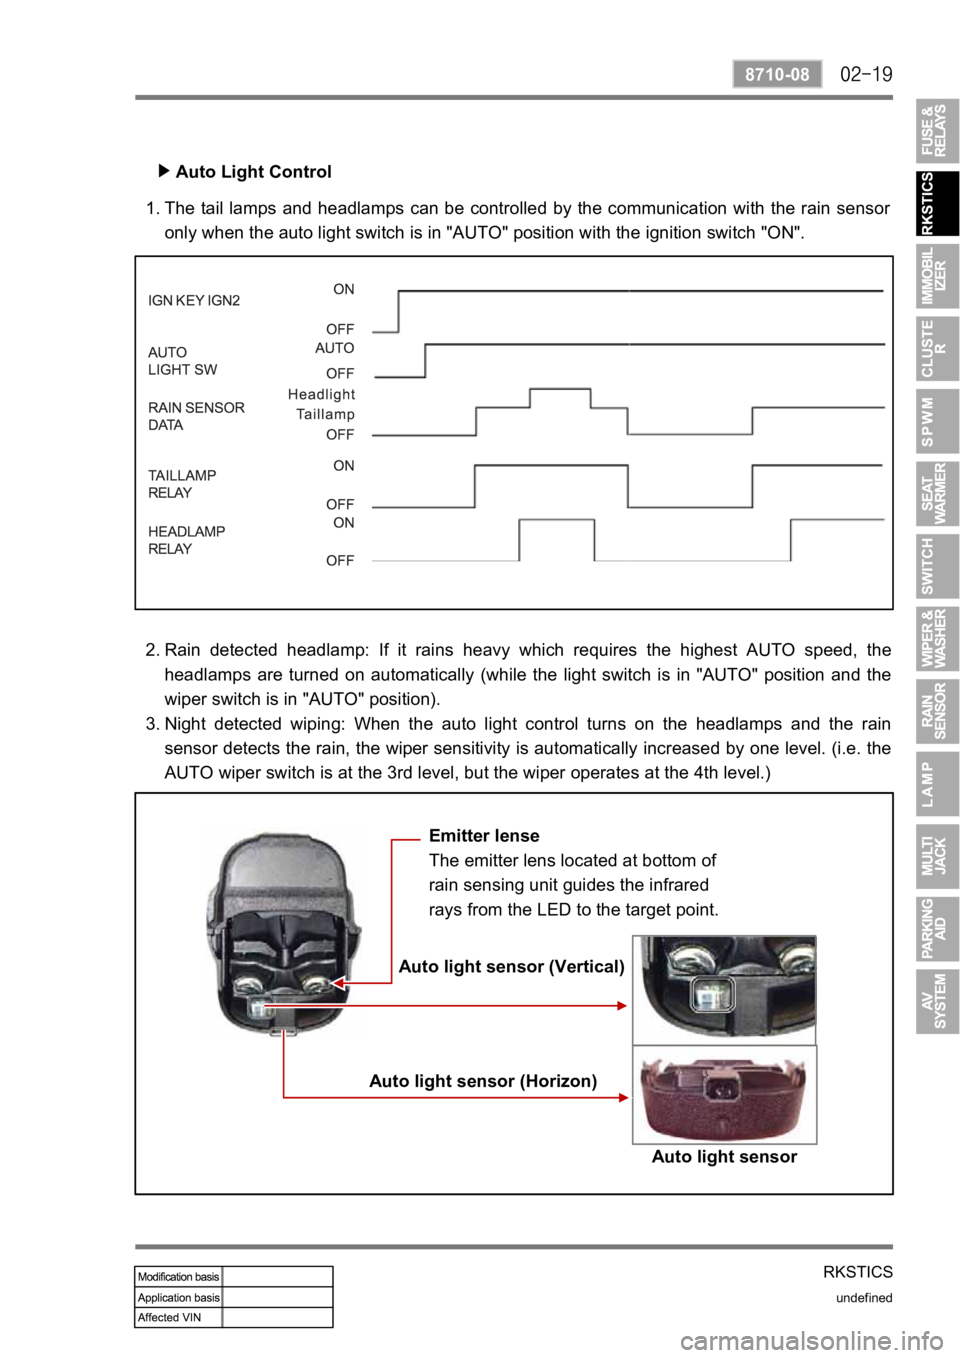 SSANGYONG REXTON 2006  Service Manual RKSTICS
undefined
8710-08
Auto Light Control
The tail  lamps  and headlamps  can be  controlled  by the communication  with  the  rain  sensor 
only when the auto light switch is in "AUTO" pos